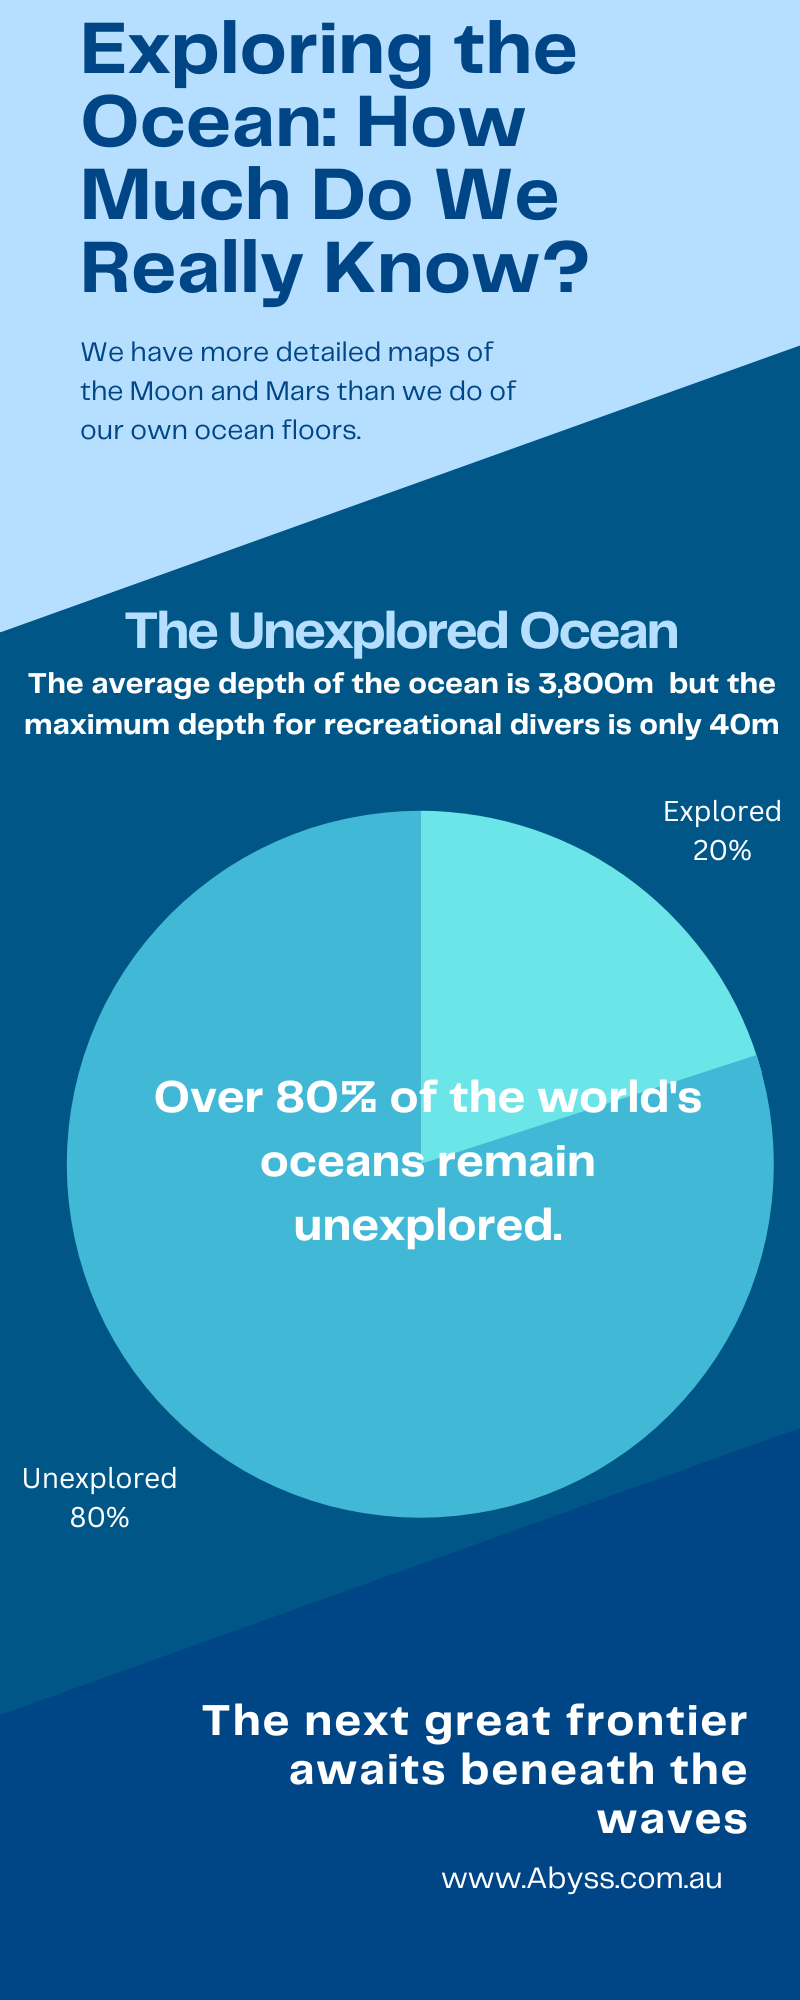 Exploring the Ocean: How Much Do We Really Know?